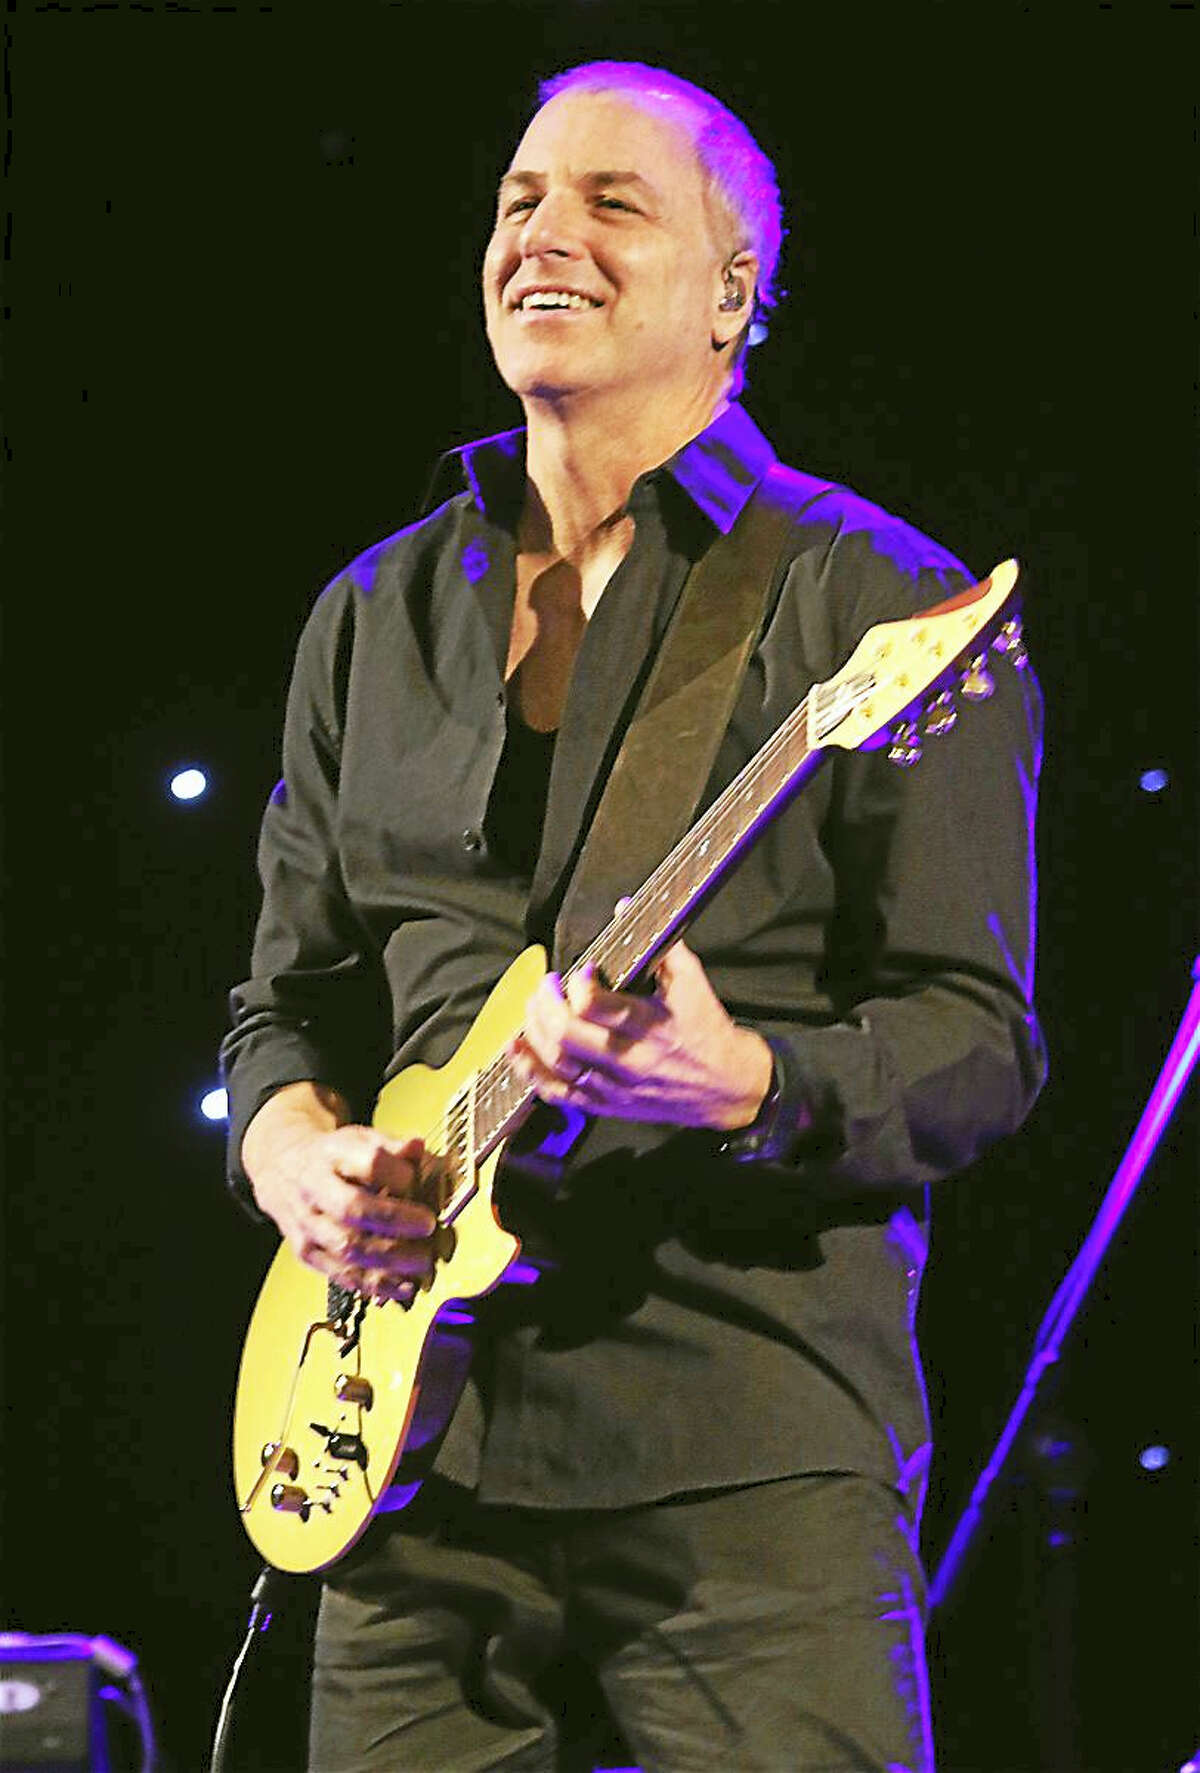 Photo by John AtashianGuitarist and singer Russ Freeman is shown performing on stage during a concert with The Rippingtons at Infinity Hall in Hartford on Oct. 13, 2016. To view all of the upcoming concerts coming to Infinity Hall in Hartford and Norfolk, visit www.infinityhall.com